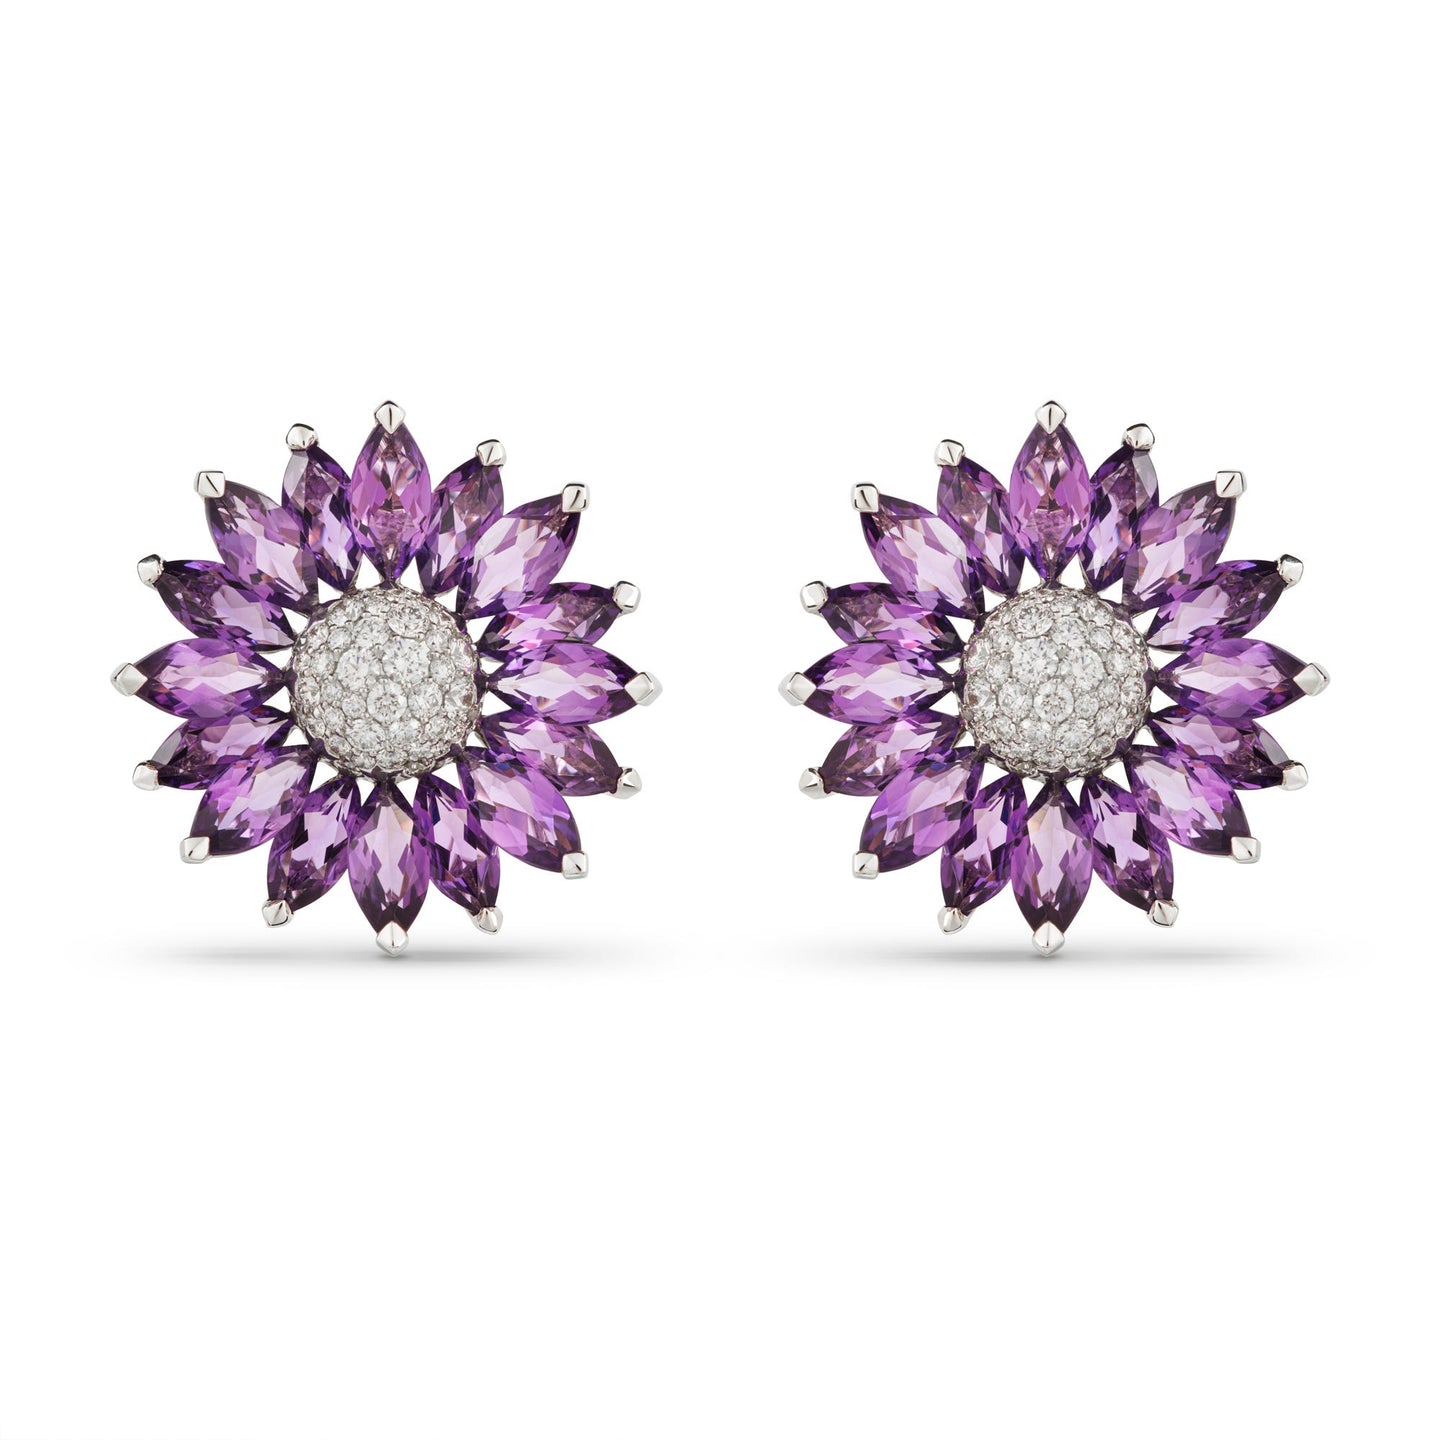 Daisy Medium Earrings in 18ct White Gold with Amethyst and Diamonds